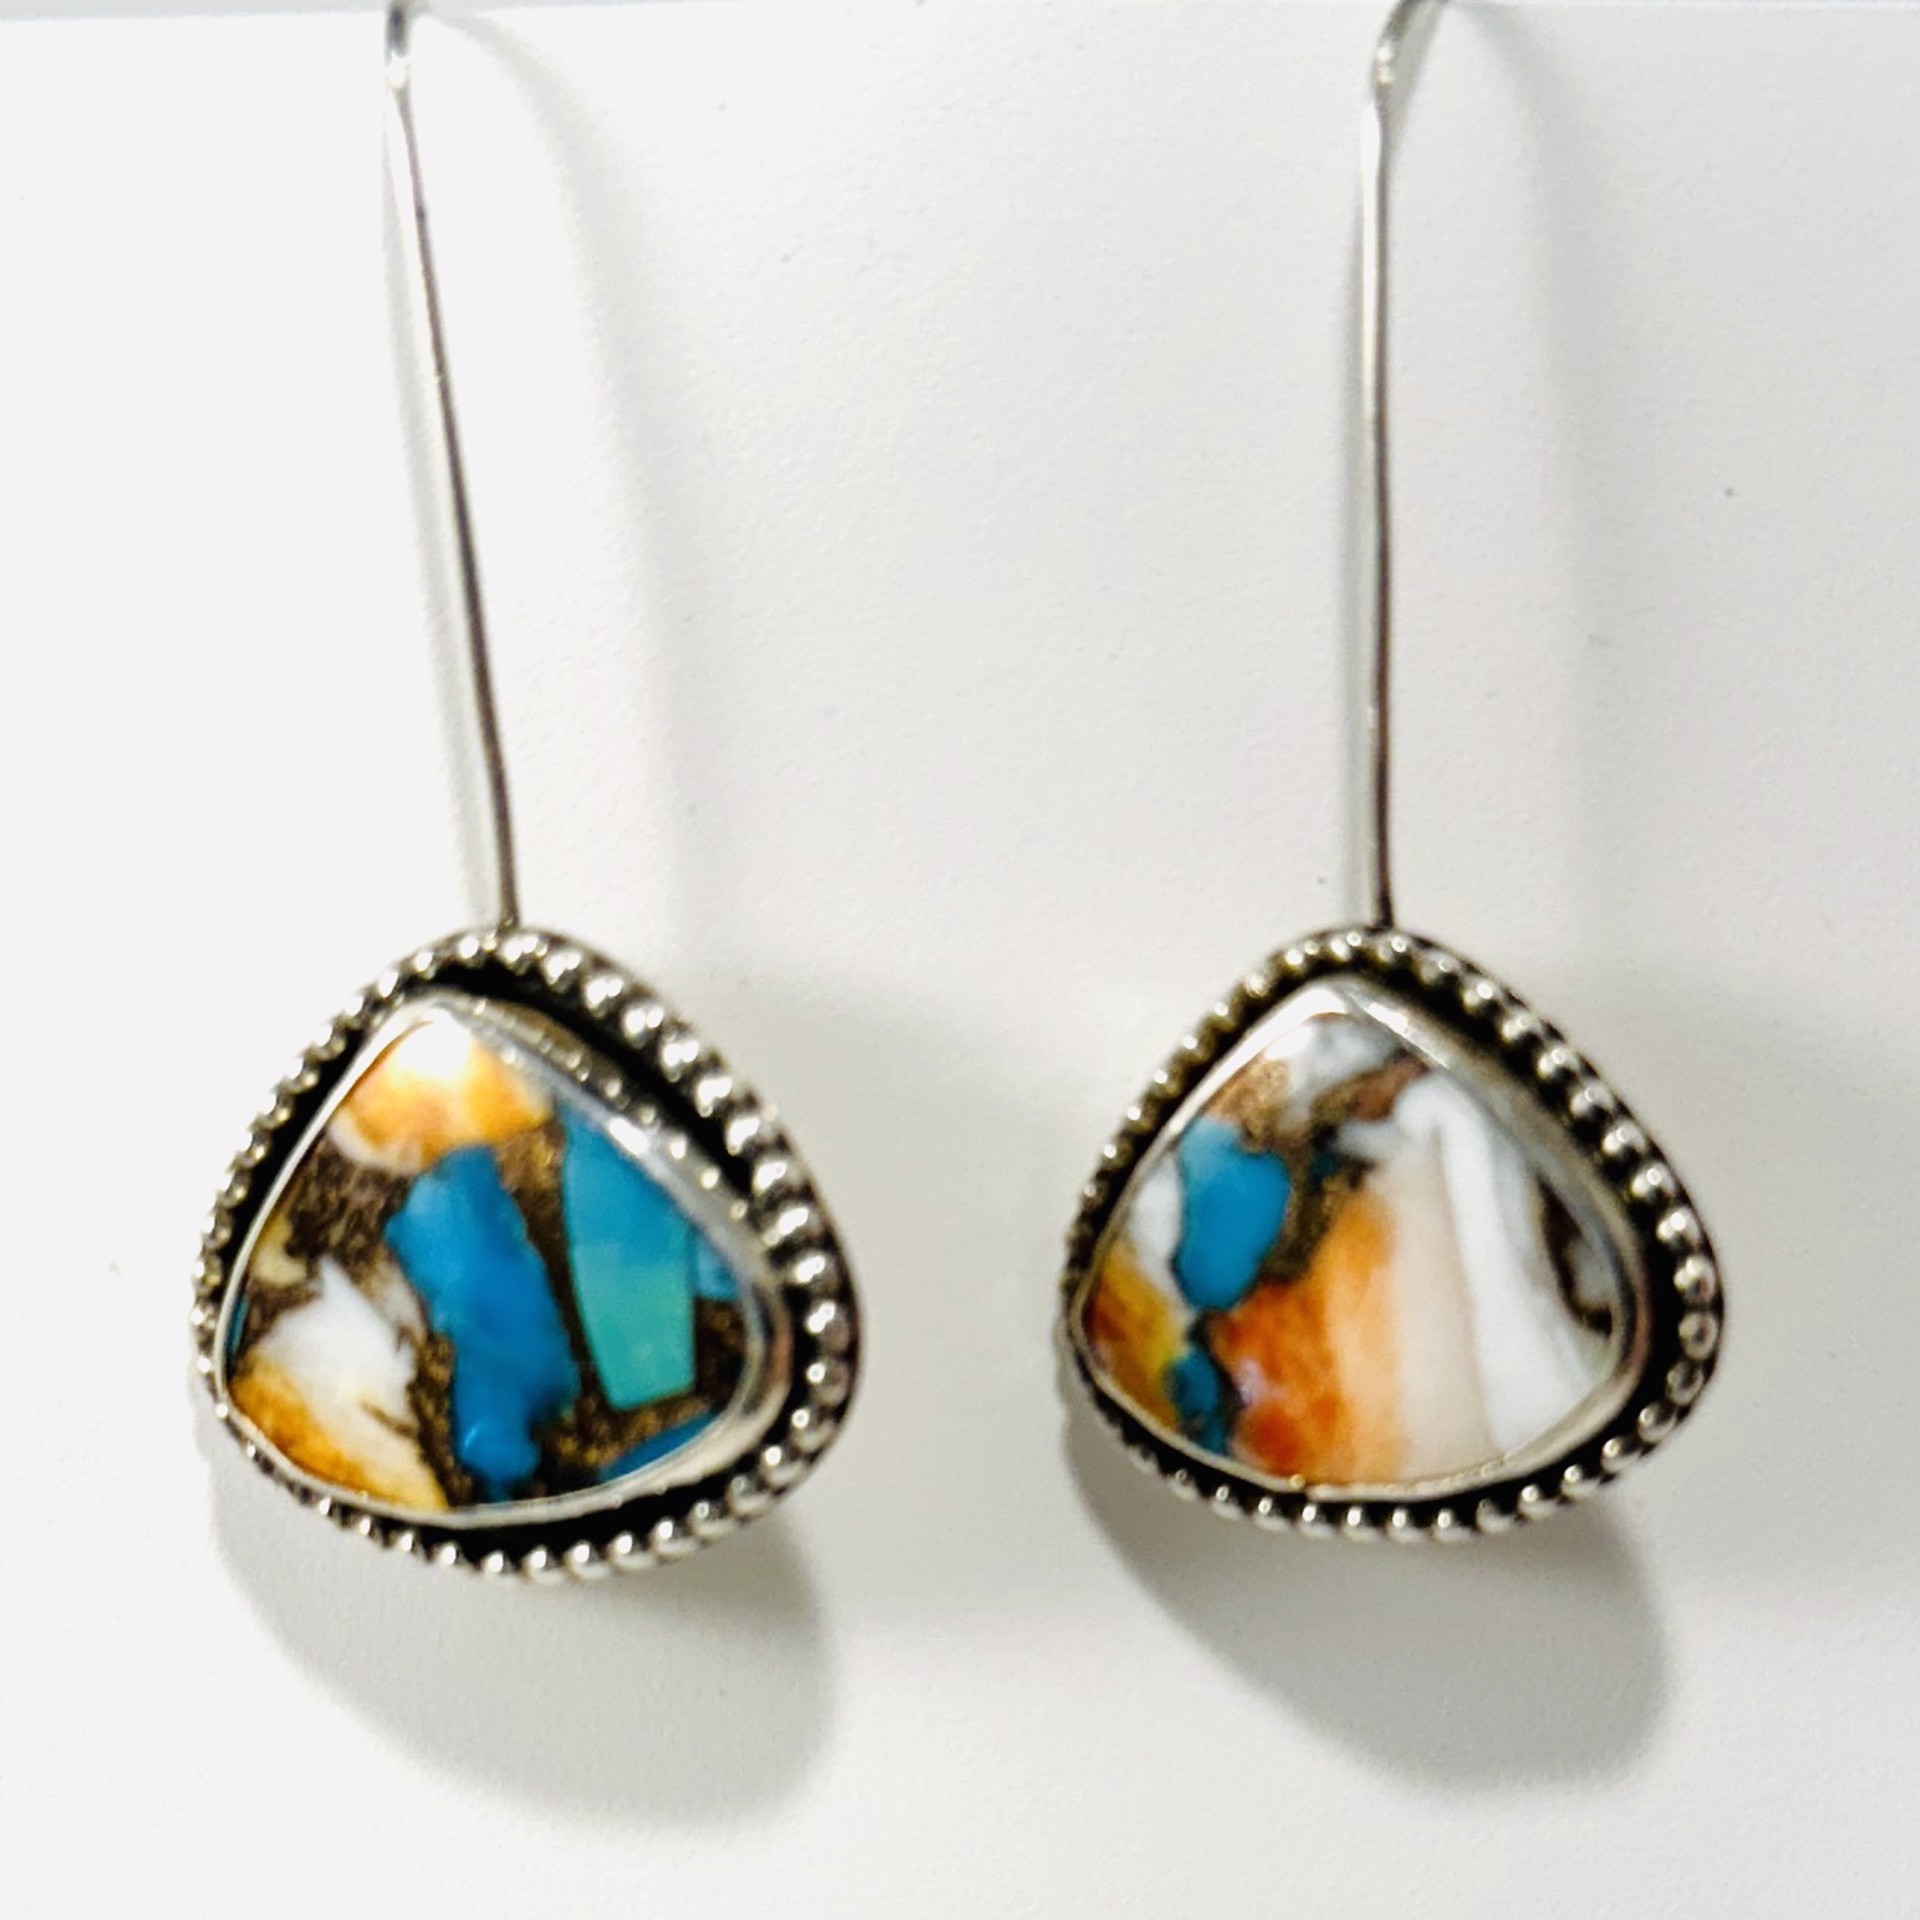 Turquoise, Spiney Oyster, Bronze Composite Earrings AB23-79 by Anne Bivens